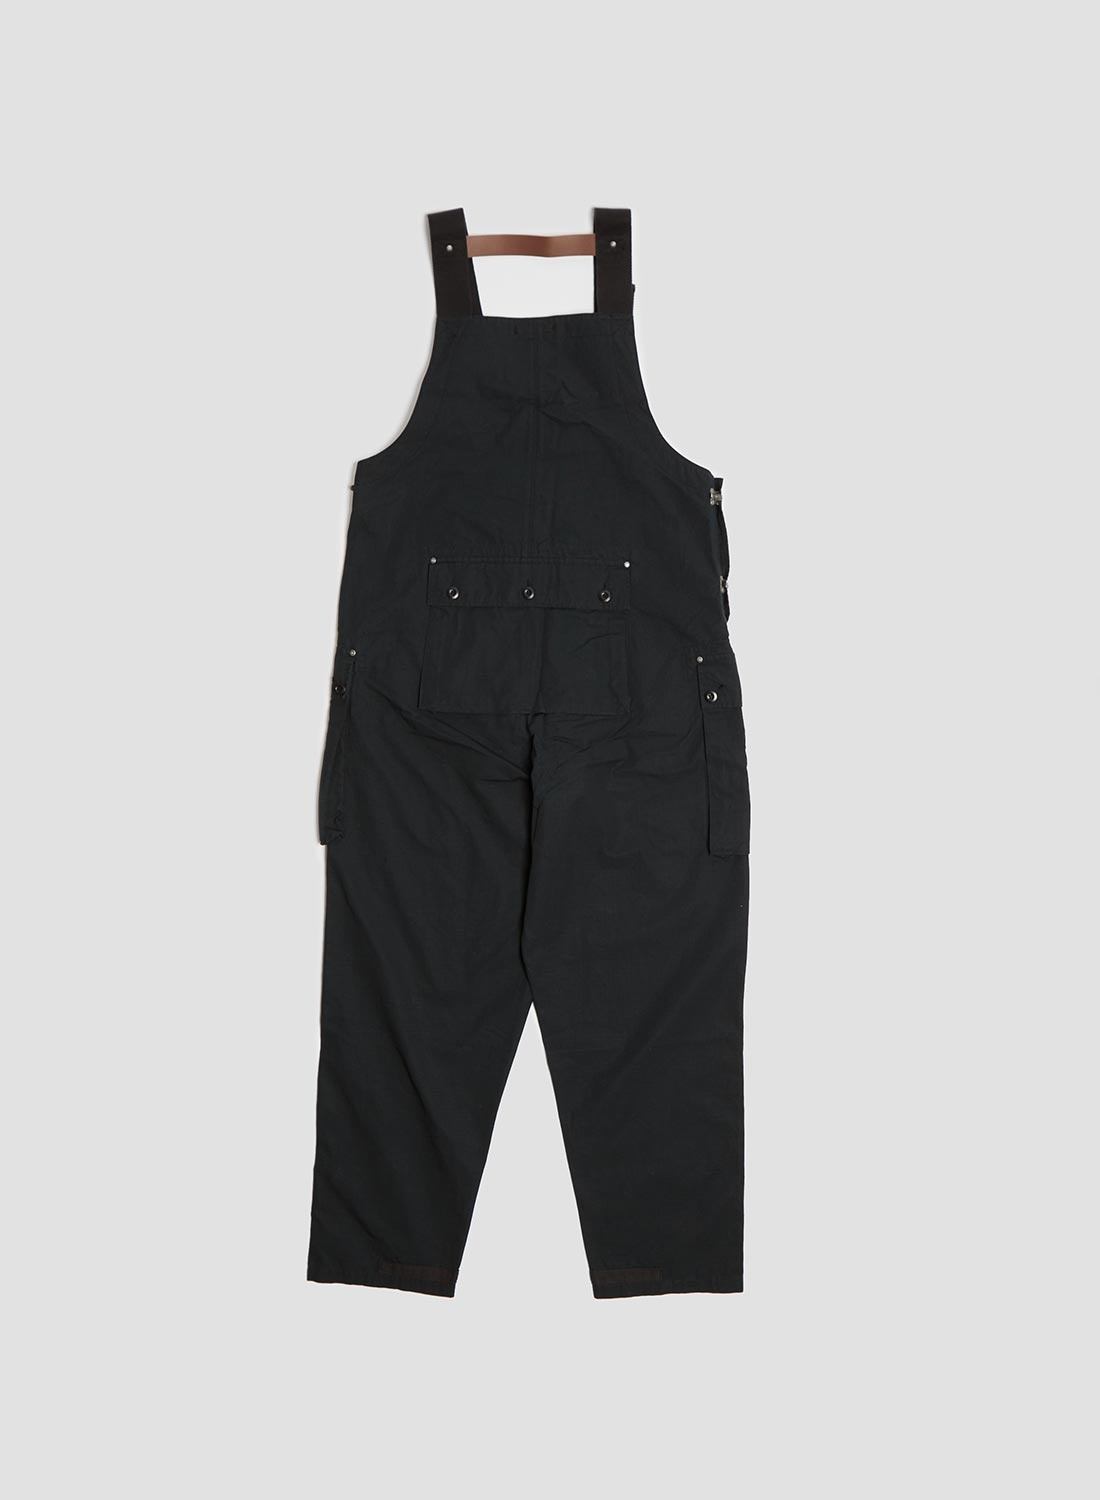 Naval Dungaree in Black (Cotton Ripstop) - 5